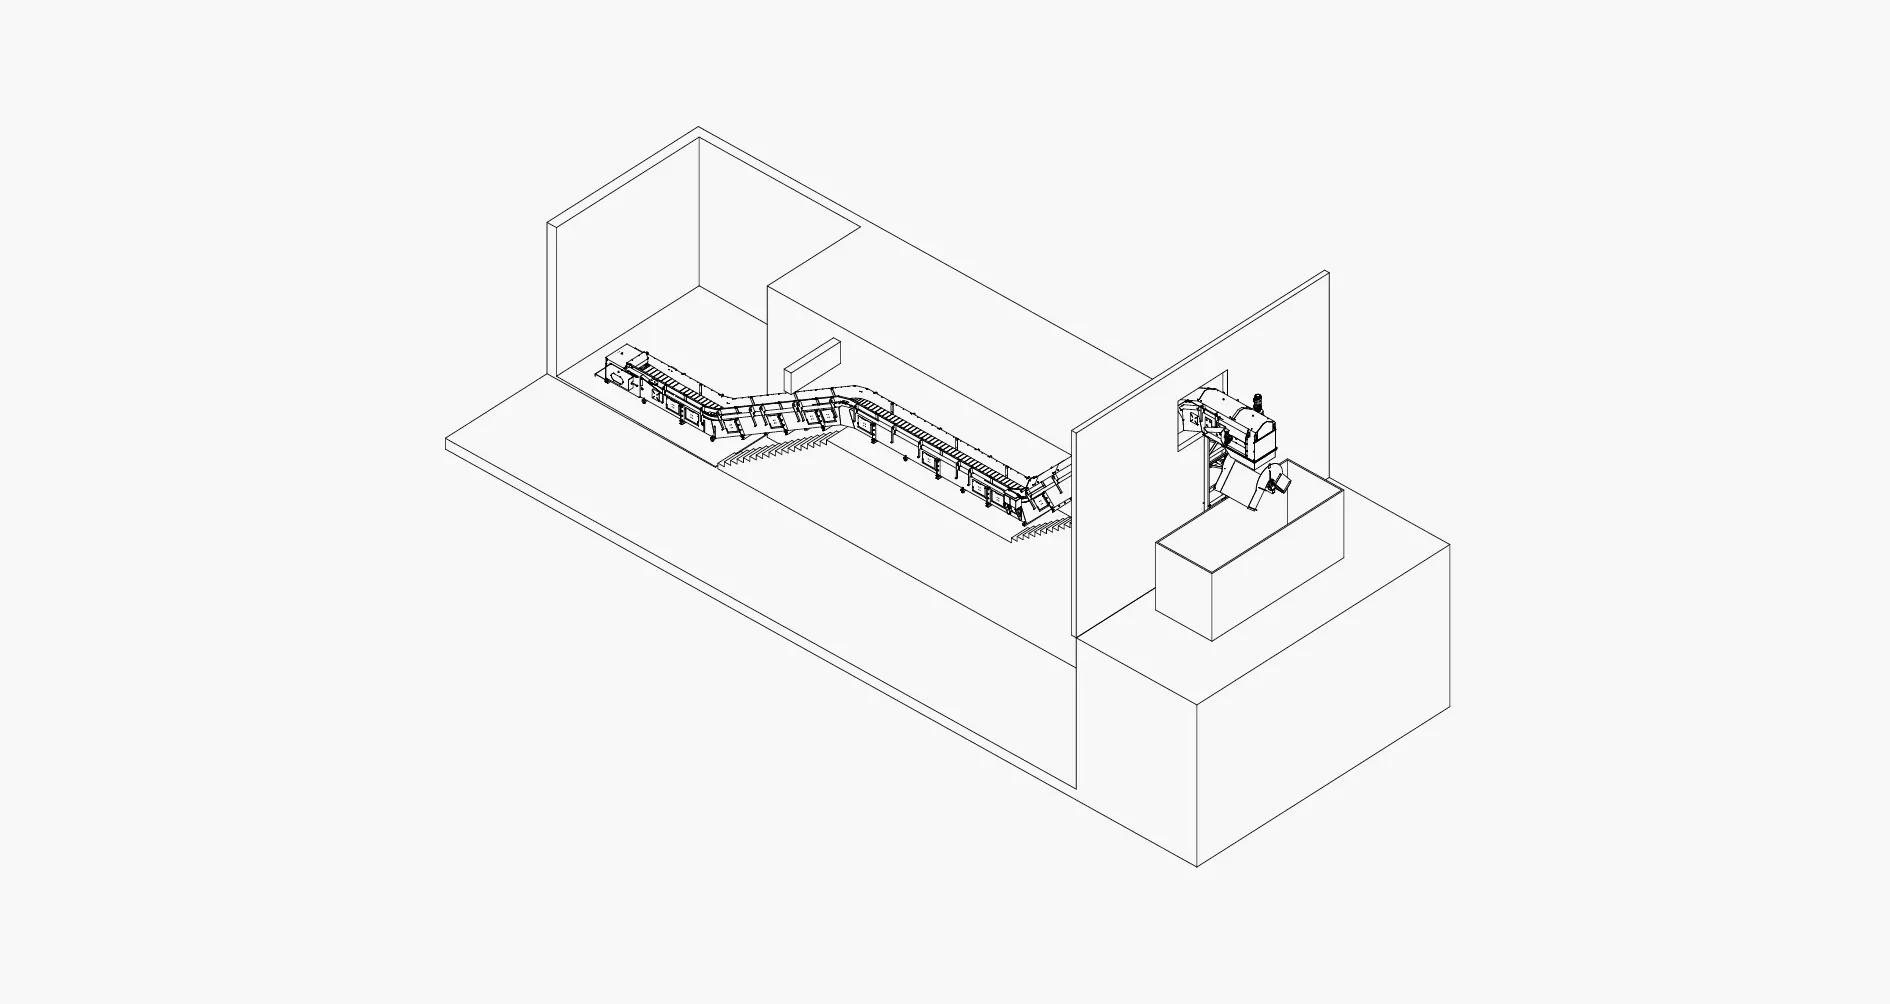 Design of an installation in a complex geometry pit